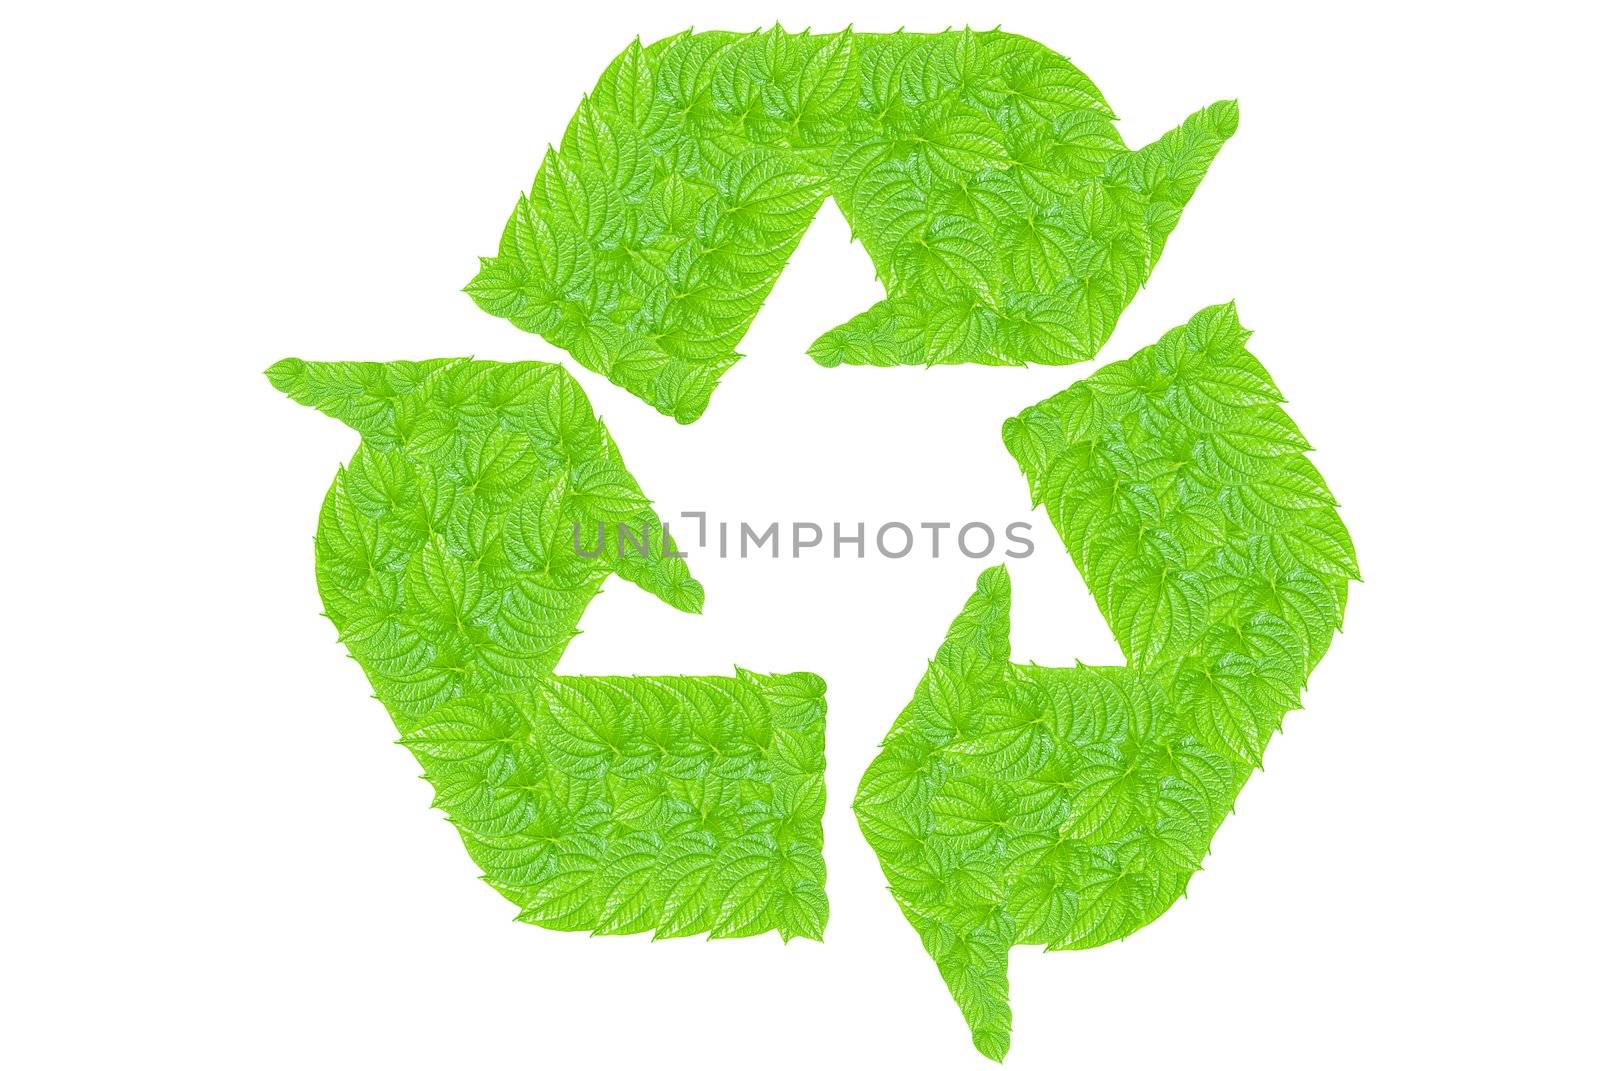 Recycle symbol made from green leafs, can be use for various environmental, ecology concepts and presentations and prints out